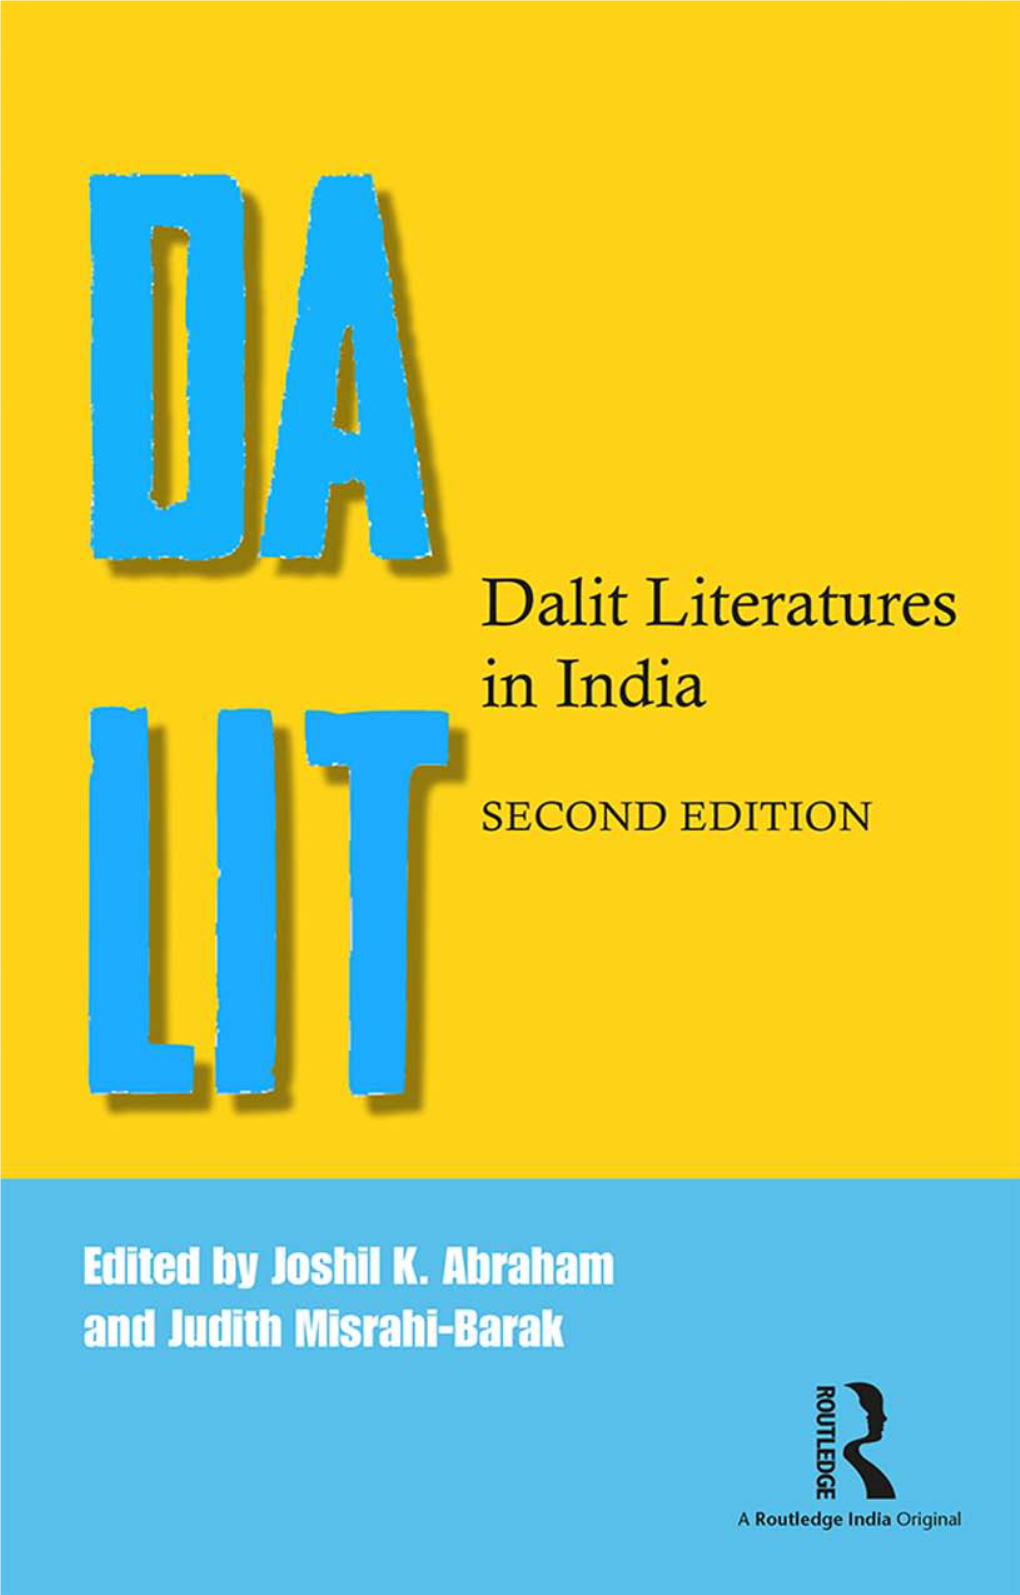 Dalit Literatures in India by Joshil K. Abraham